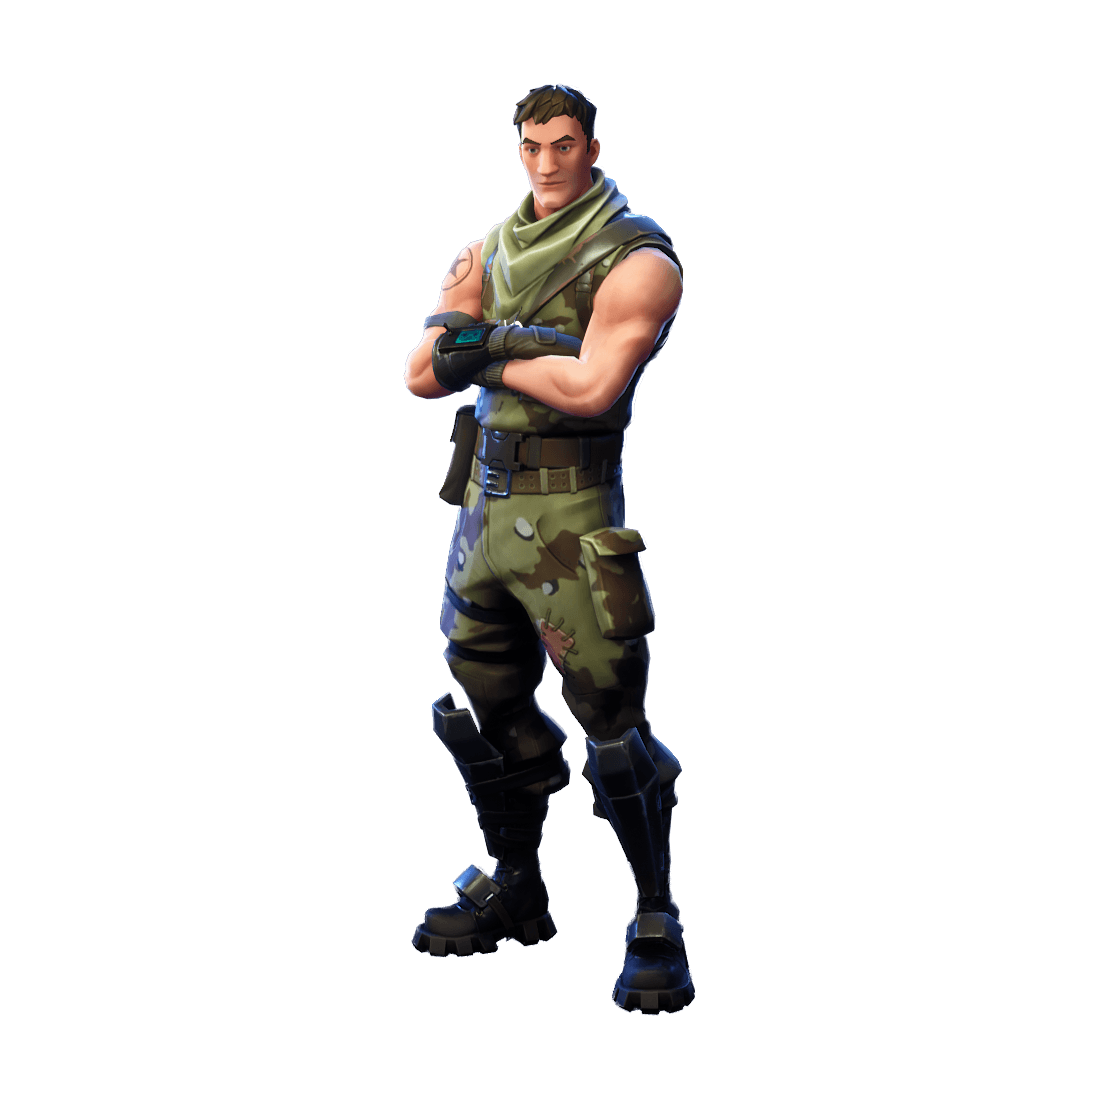 Highrise Assault Trooper Fortnite Outfit Skin How to Get. Fortnite